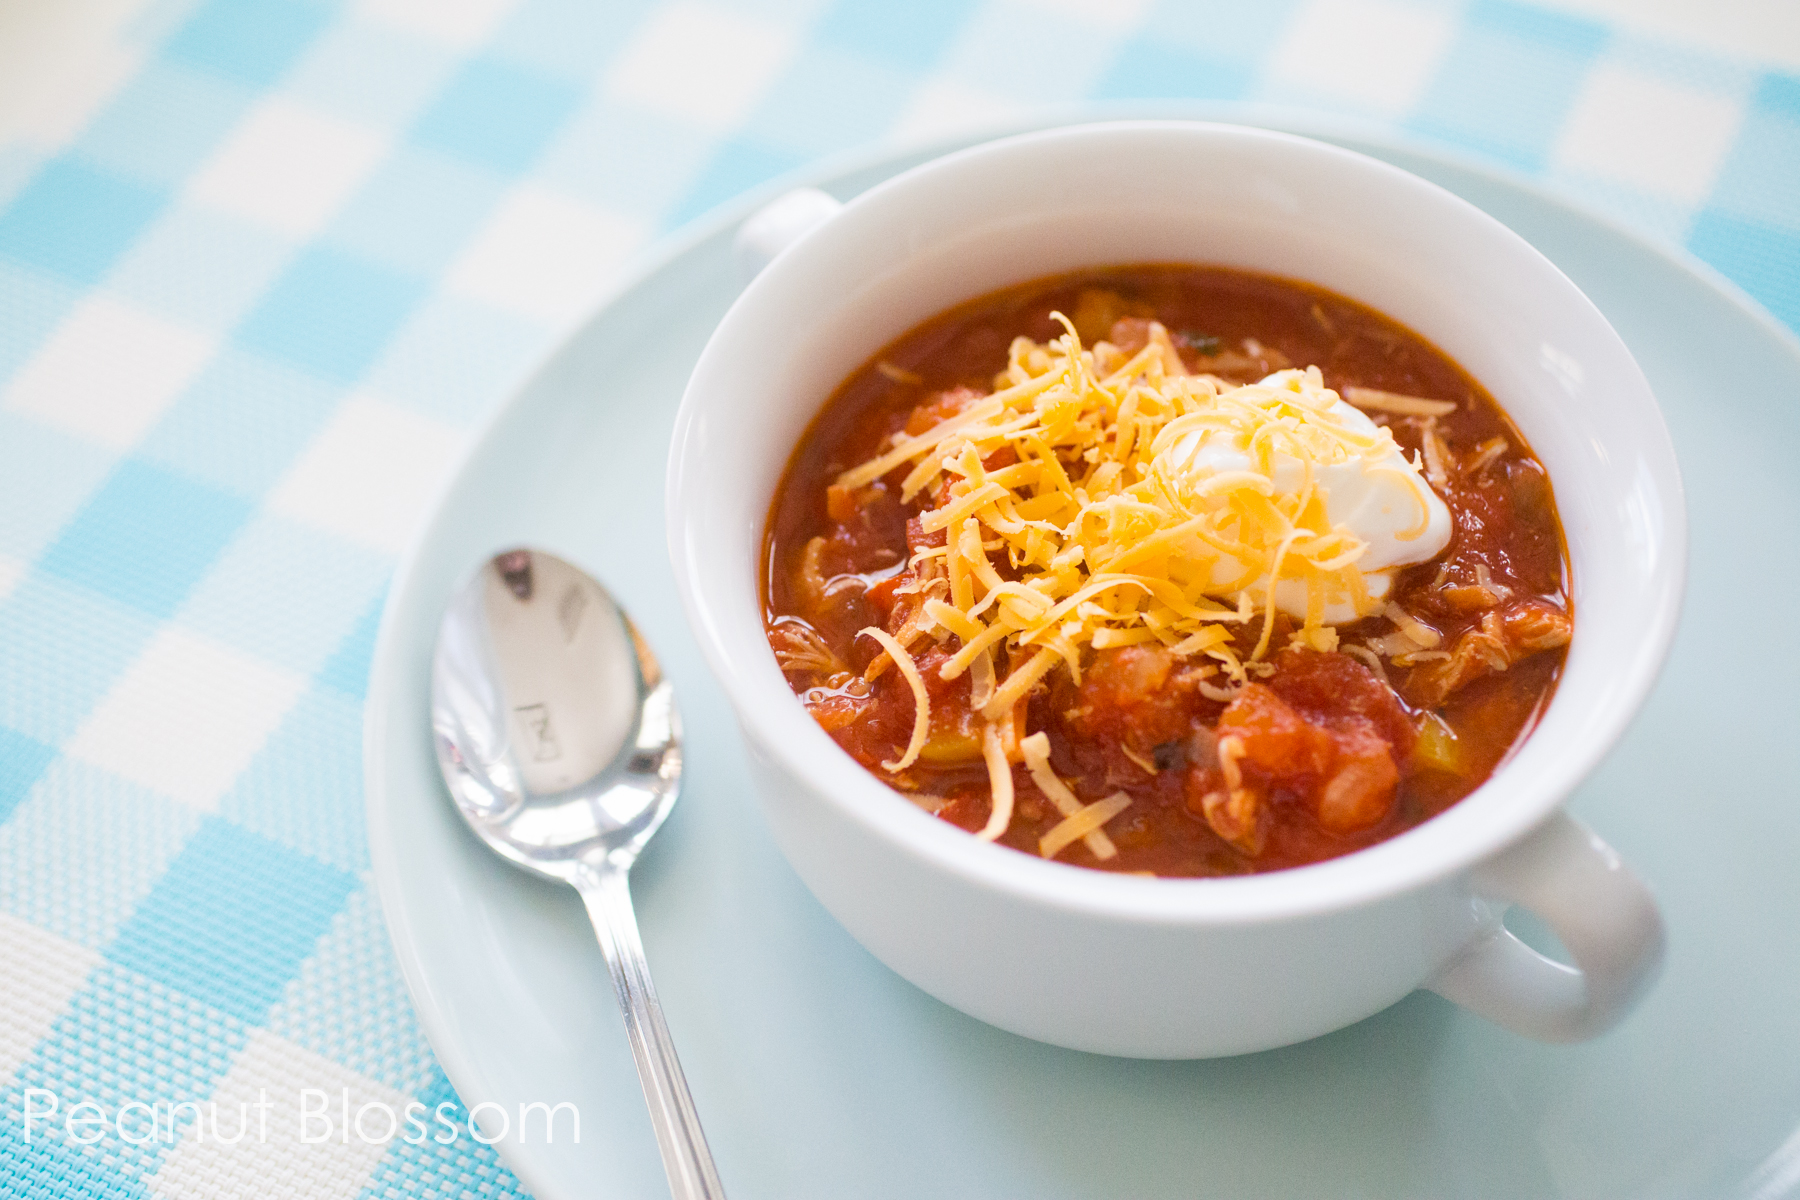 Homemade chicken chili: tons of veggies but NO beans! Only 3 WW points per serving.